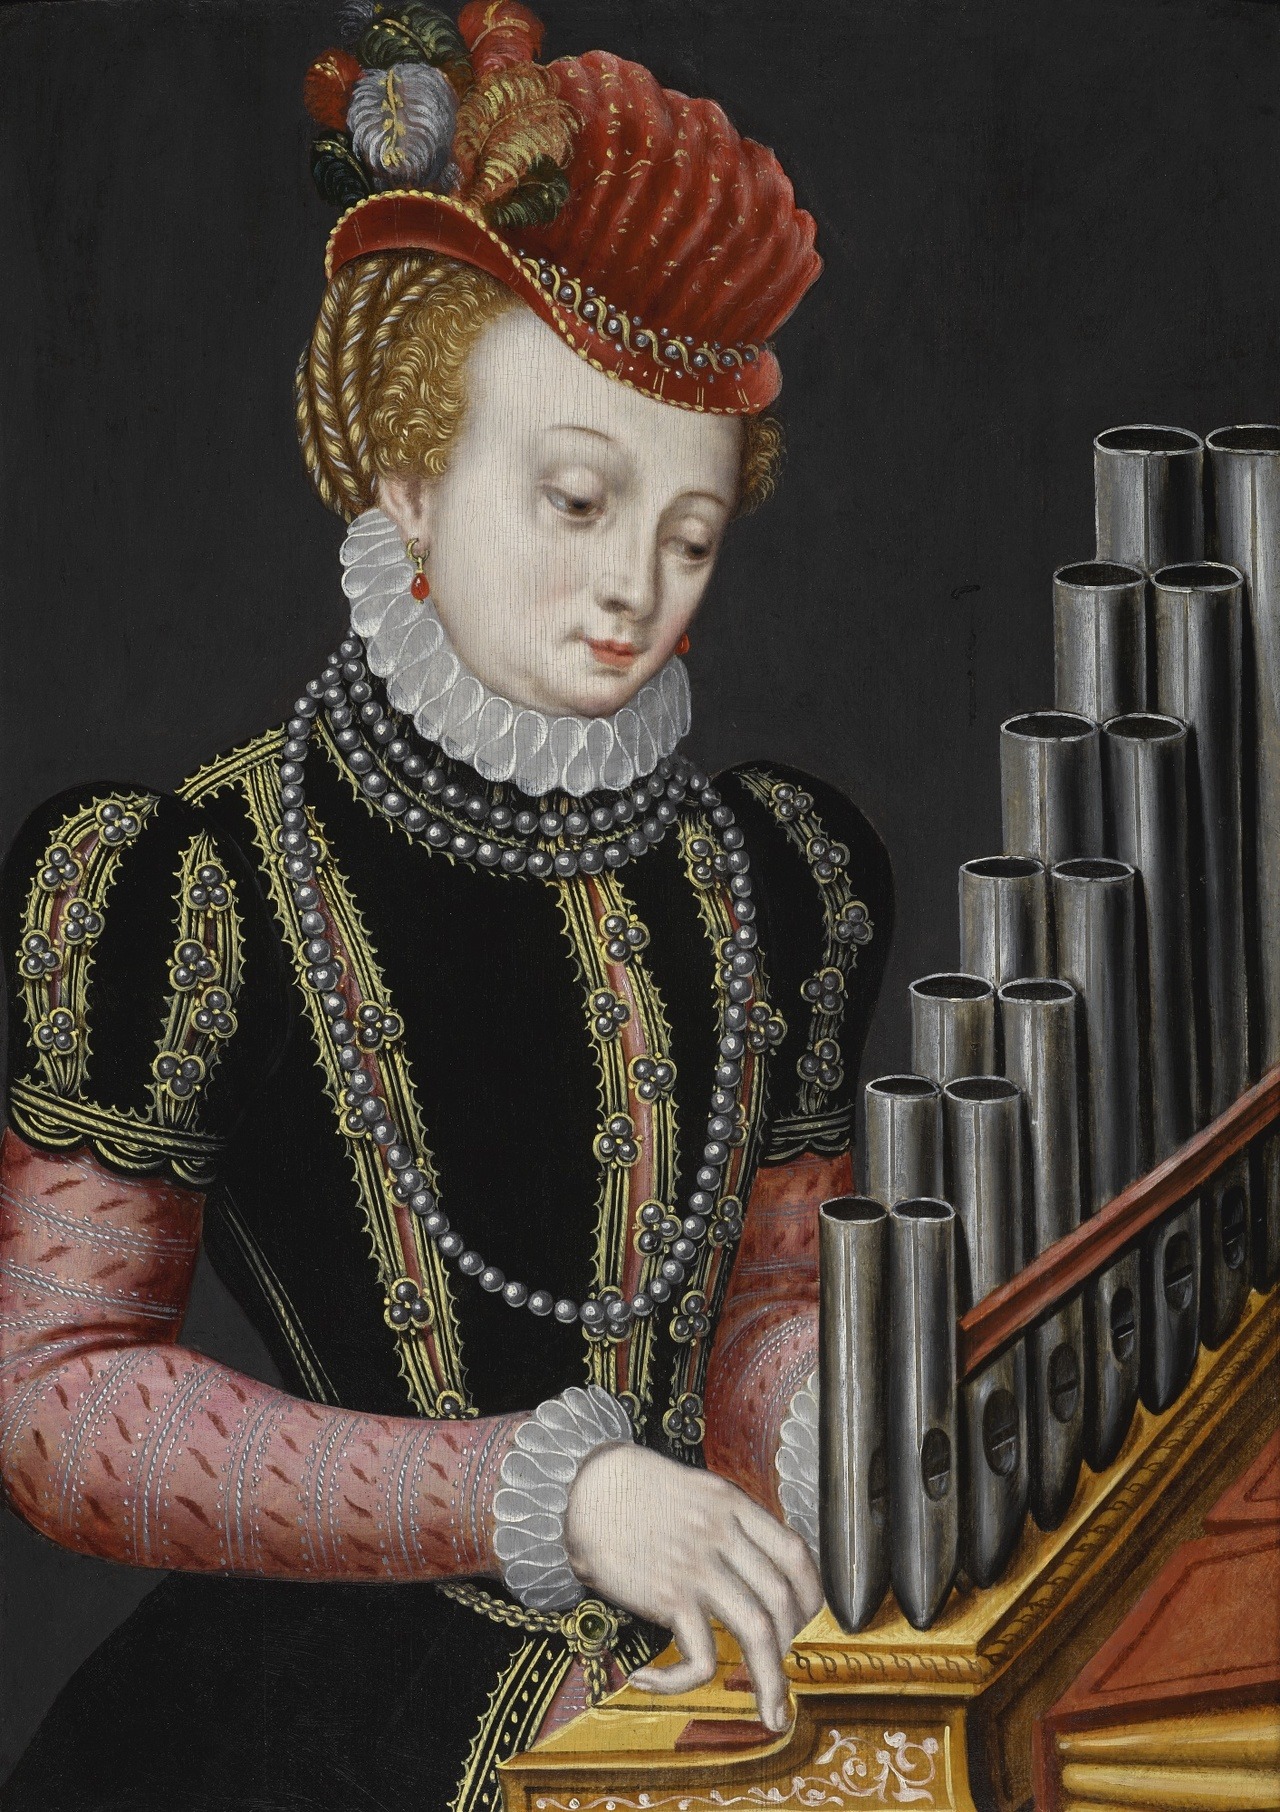 Flemish School, â€˜Portrait of an elegant lady at an organ, as Saint Ceciliaâ€™, oil on panel, 1500s, Flemish, for sale est. 8,000-12,000 GBP in Sothebyâ€™s Old Masters day sale, July 2019